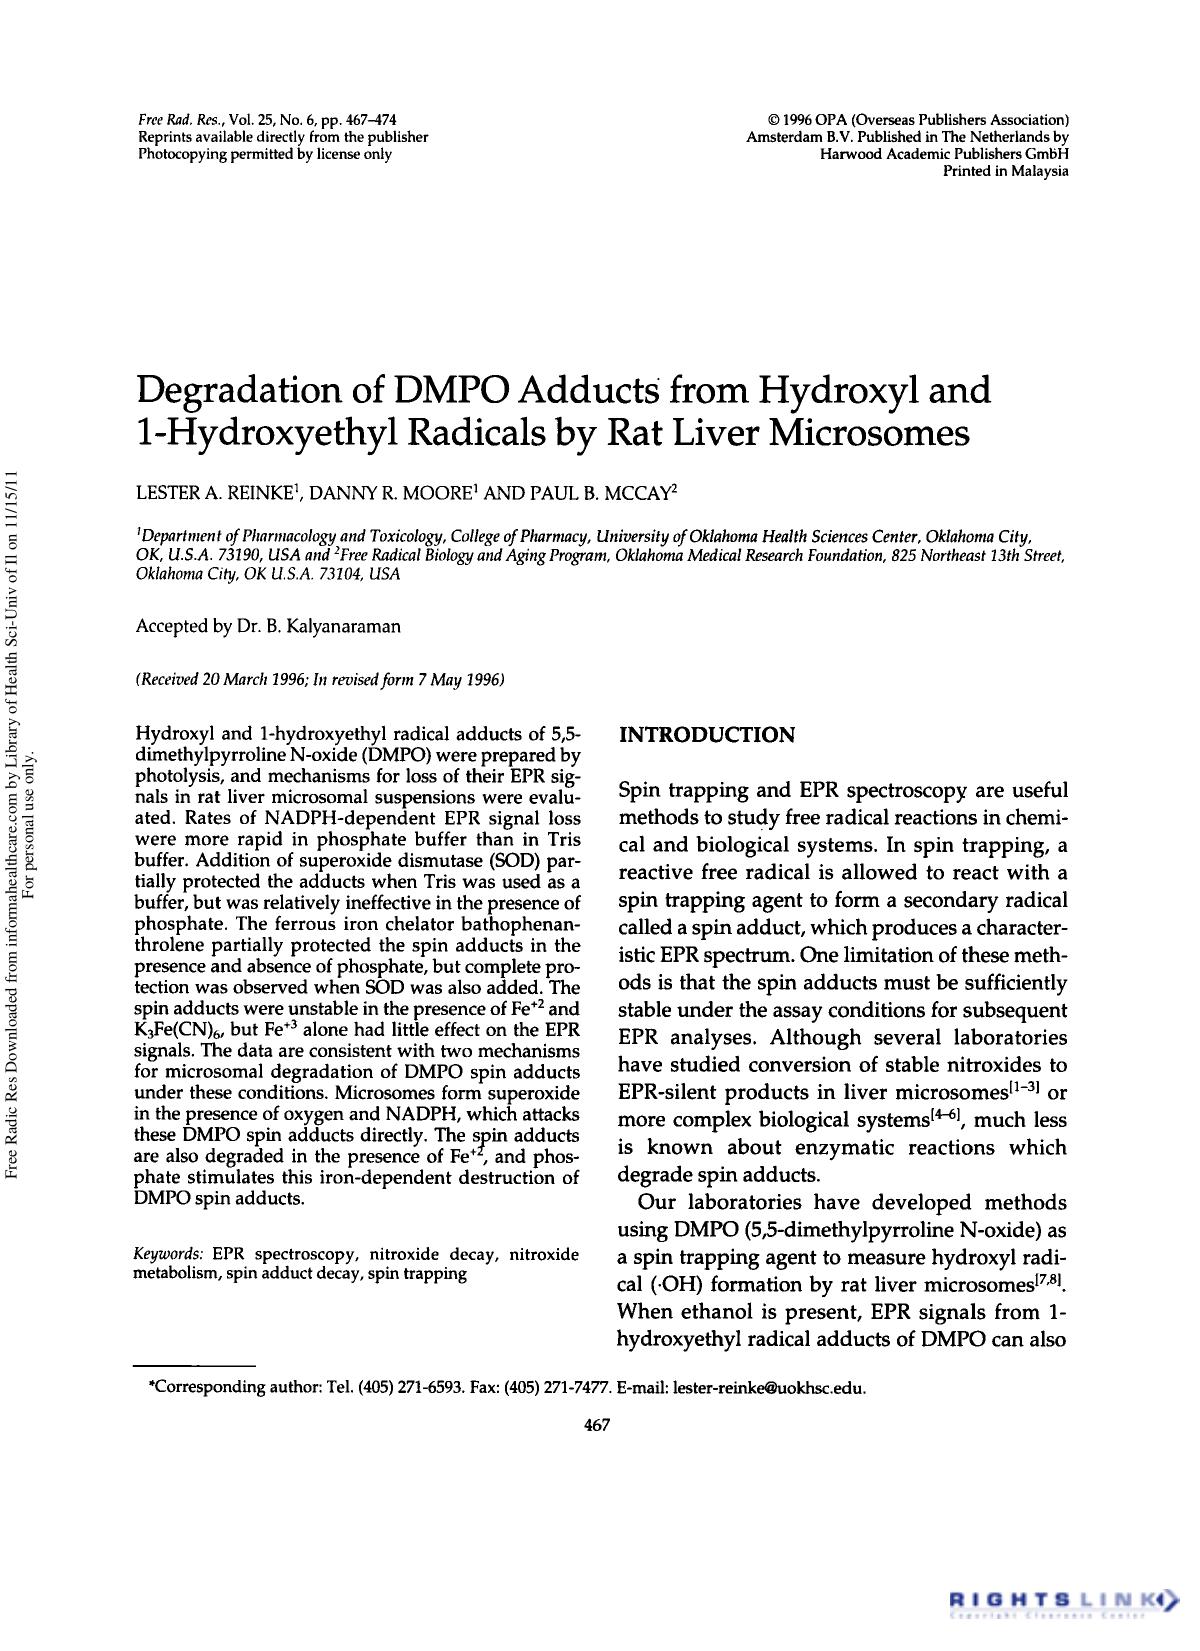 Degradation of DMPO Adducts from Hydroxyl and 1-Hydroxyethyl Radicals by Rat Liver Microsomes by Lester A. Reinke1† Danny R. Moore1 & Paul B. McCay2